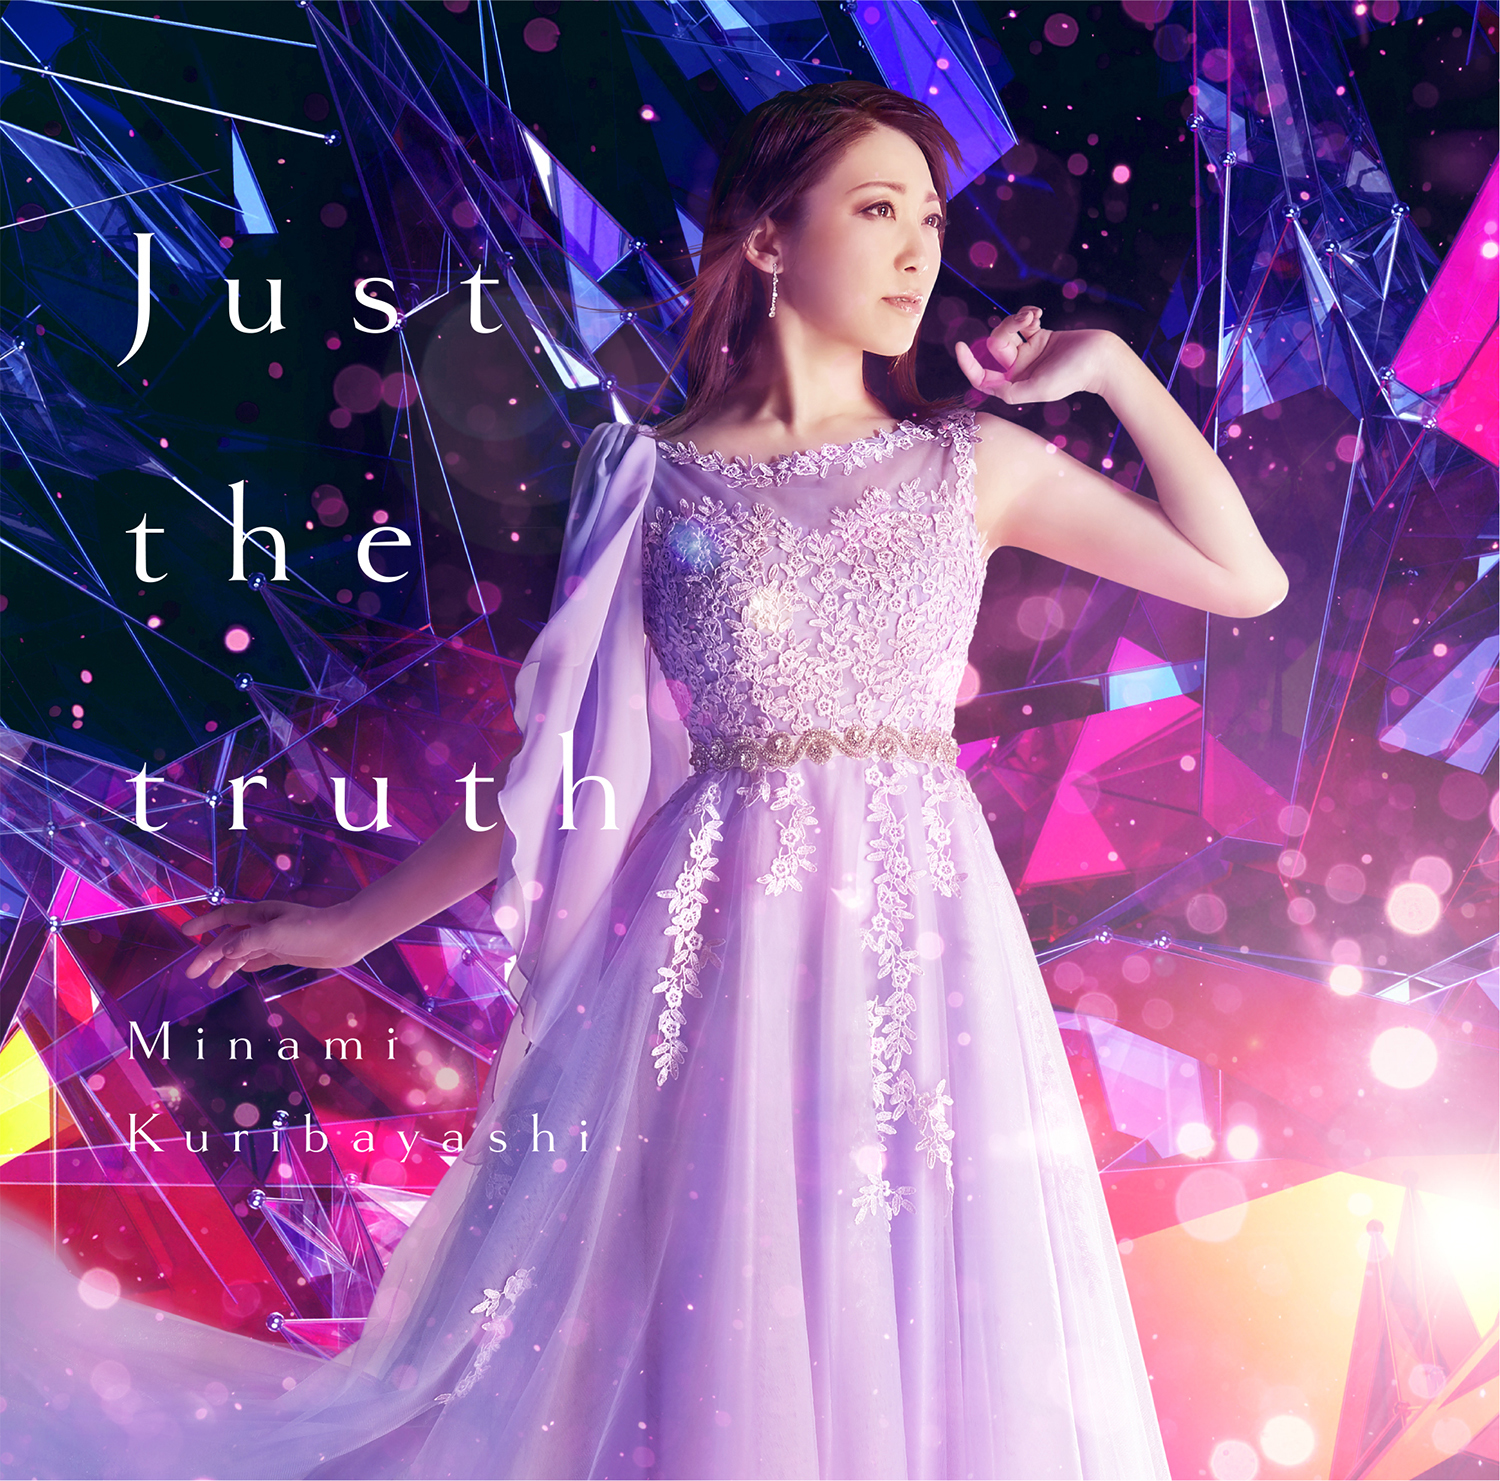 「Just the truth」【初回限定盤】